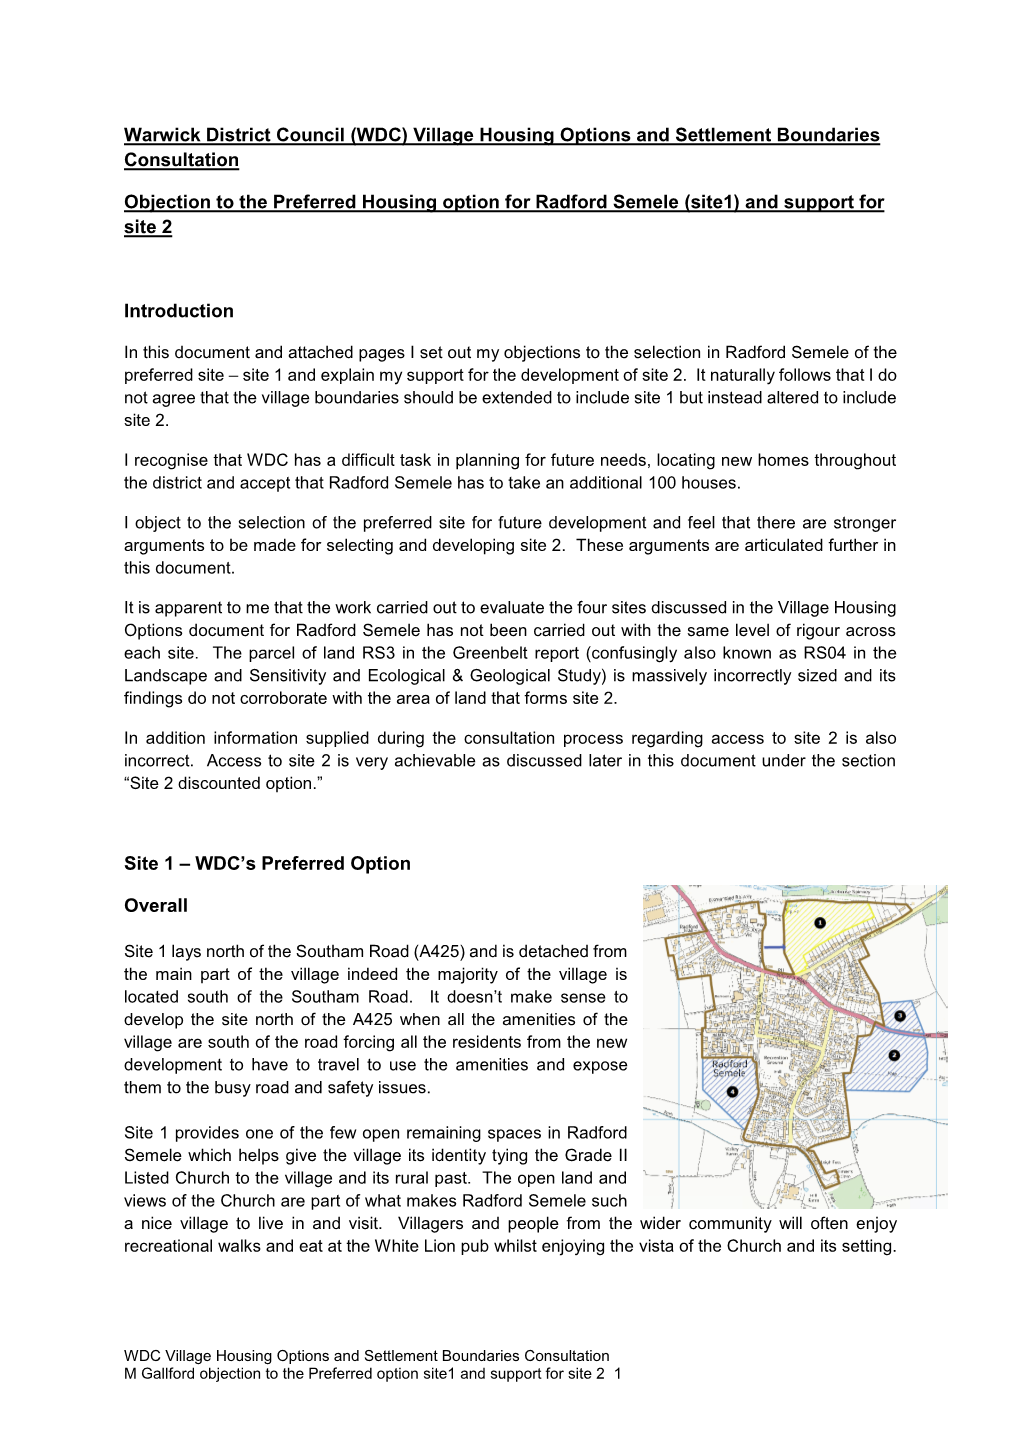 Warwick District Council (WDC) Village Housing Options and Settlement Boundaries Consultation Objection to the Preferred Housing